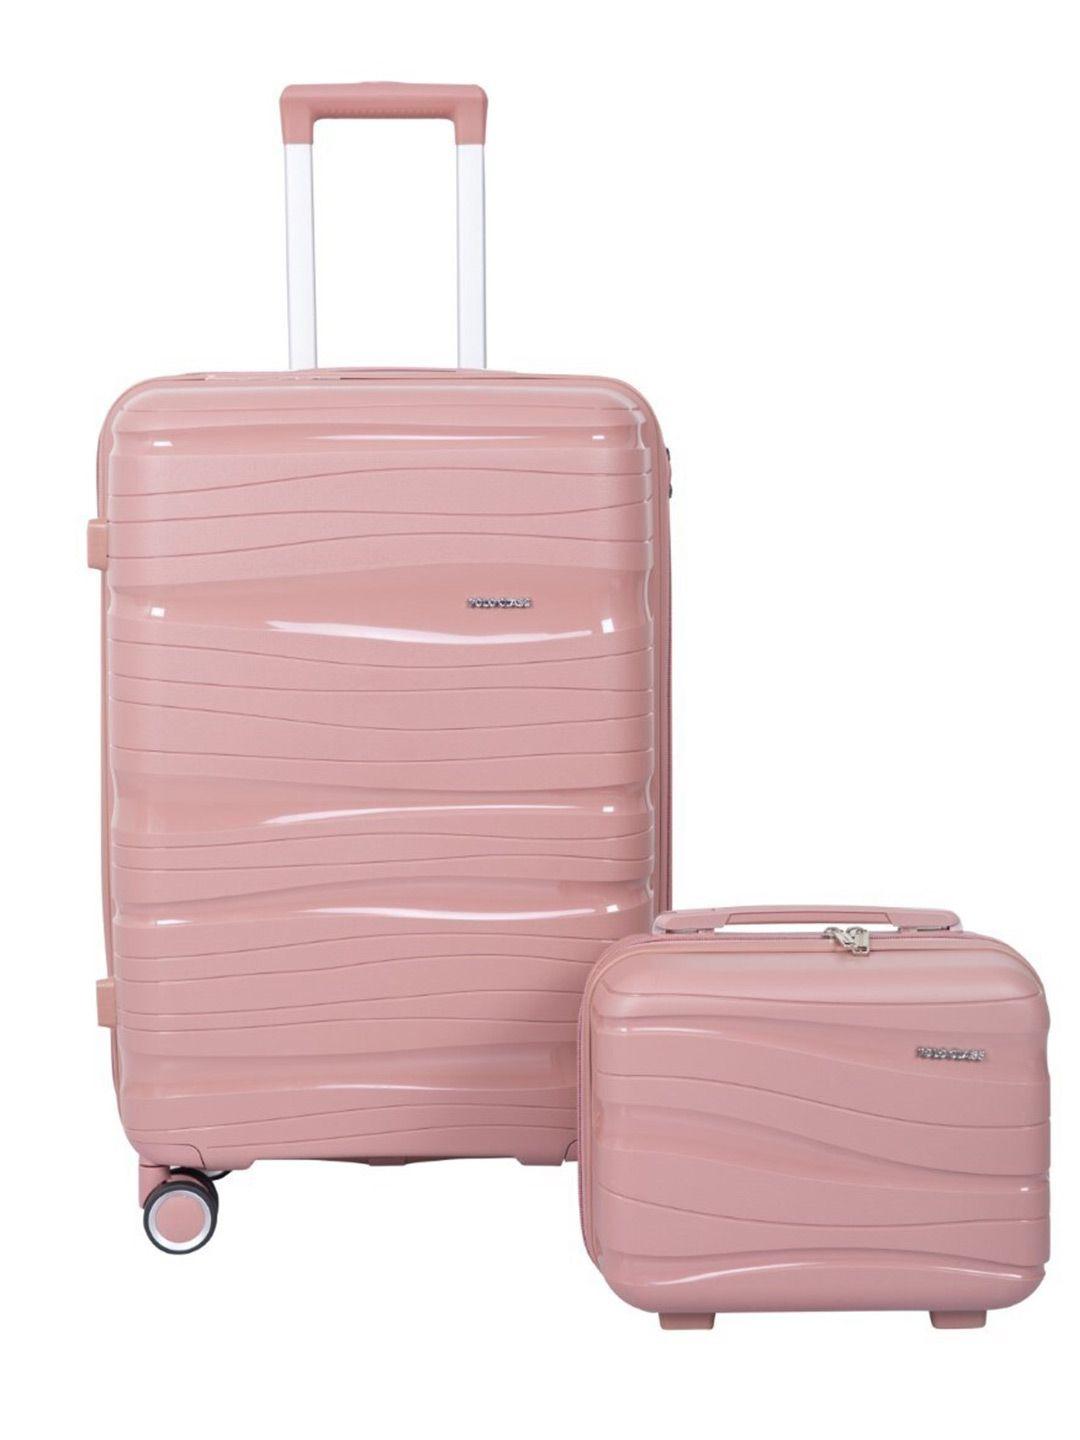 polo class set of 2 hard-sided trolley suitcase - 50 l